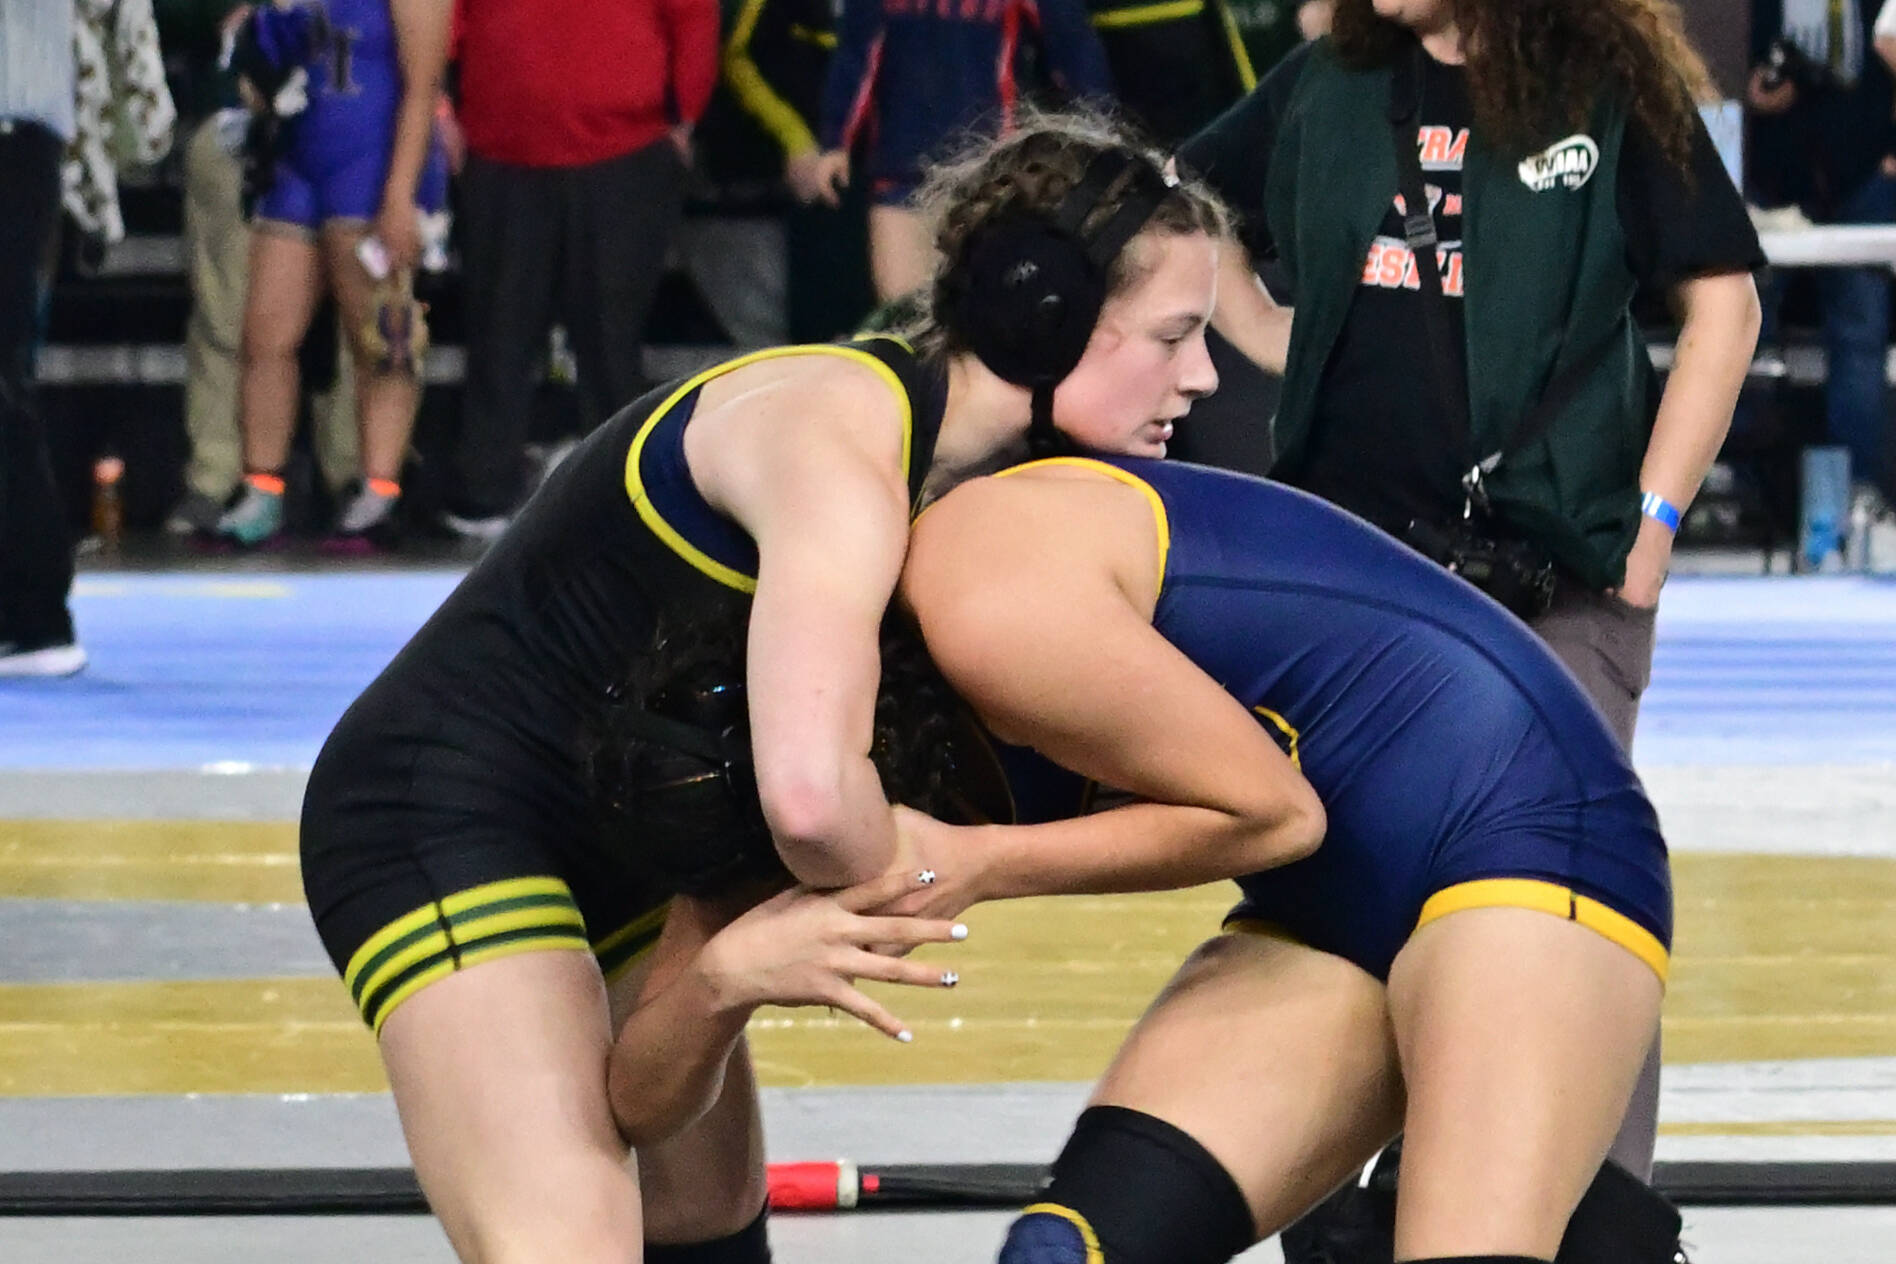 Stephen Murphy photo Lena Puz (left) fights for her quarterfinals victory over freshman Abbygale Garza from Wapato.